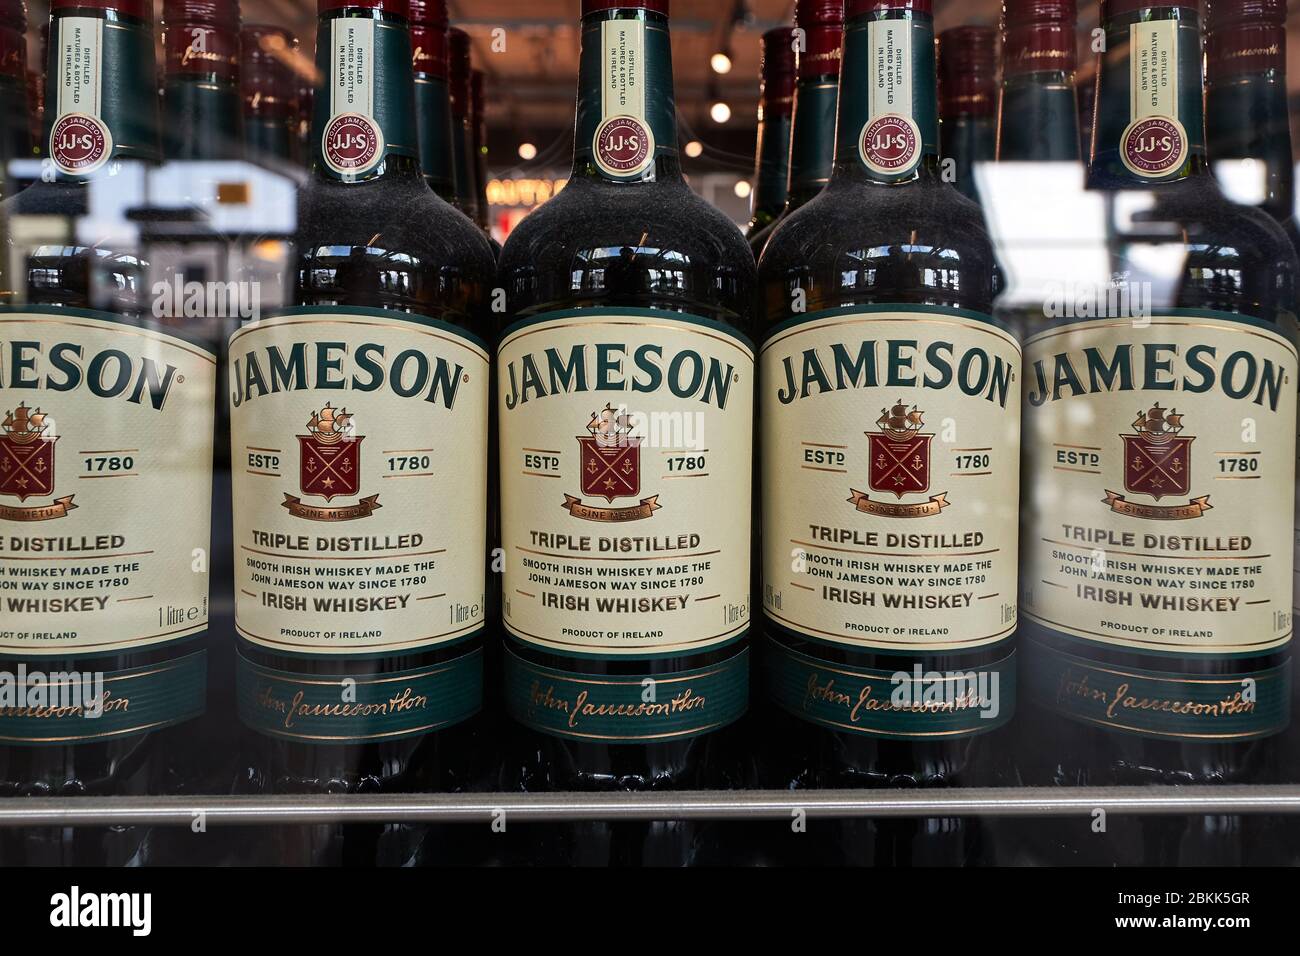 Bottles of Jameson whisky in a shop window Stock Photo